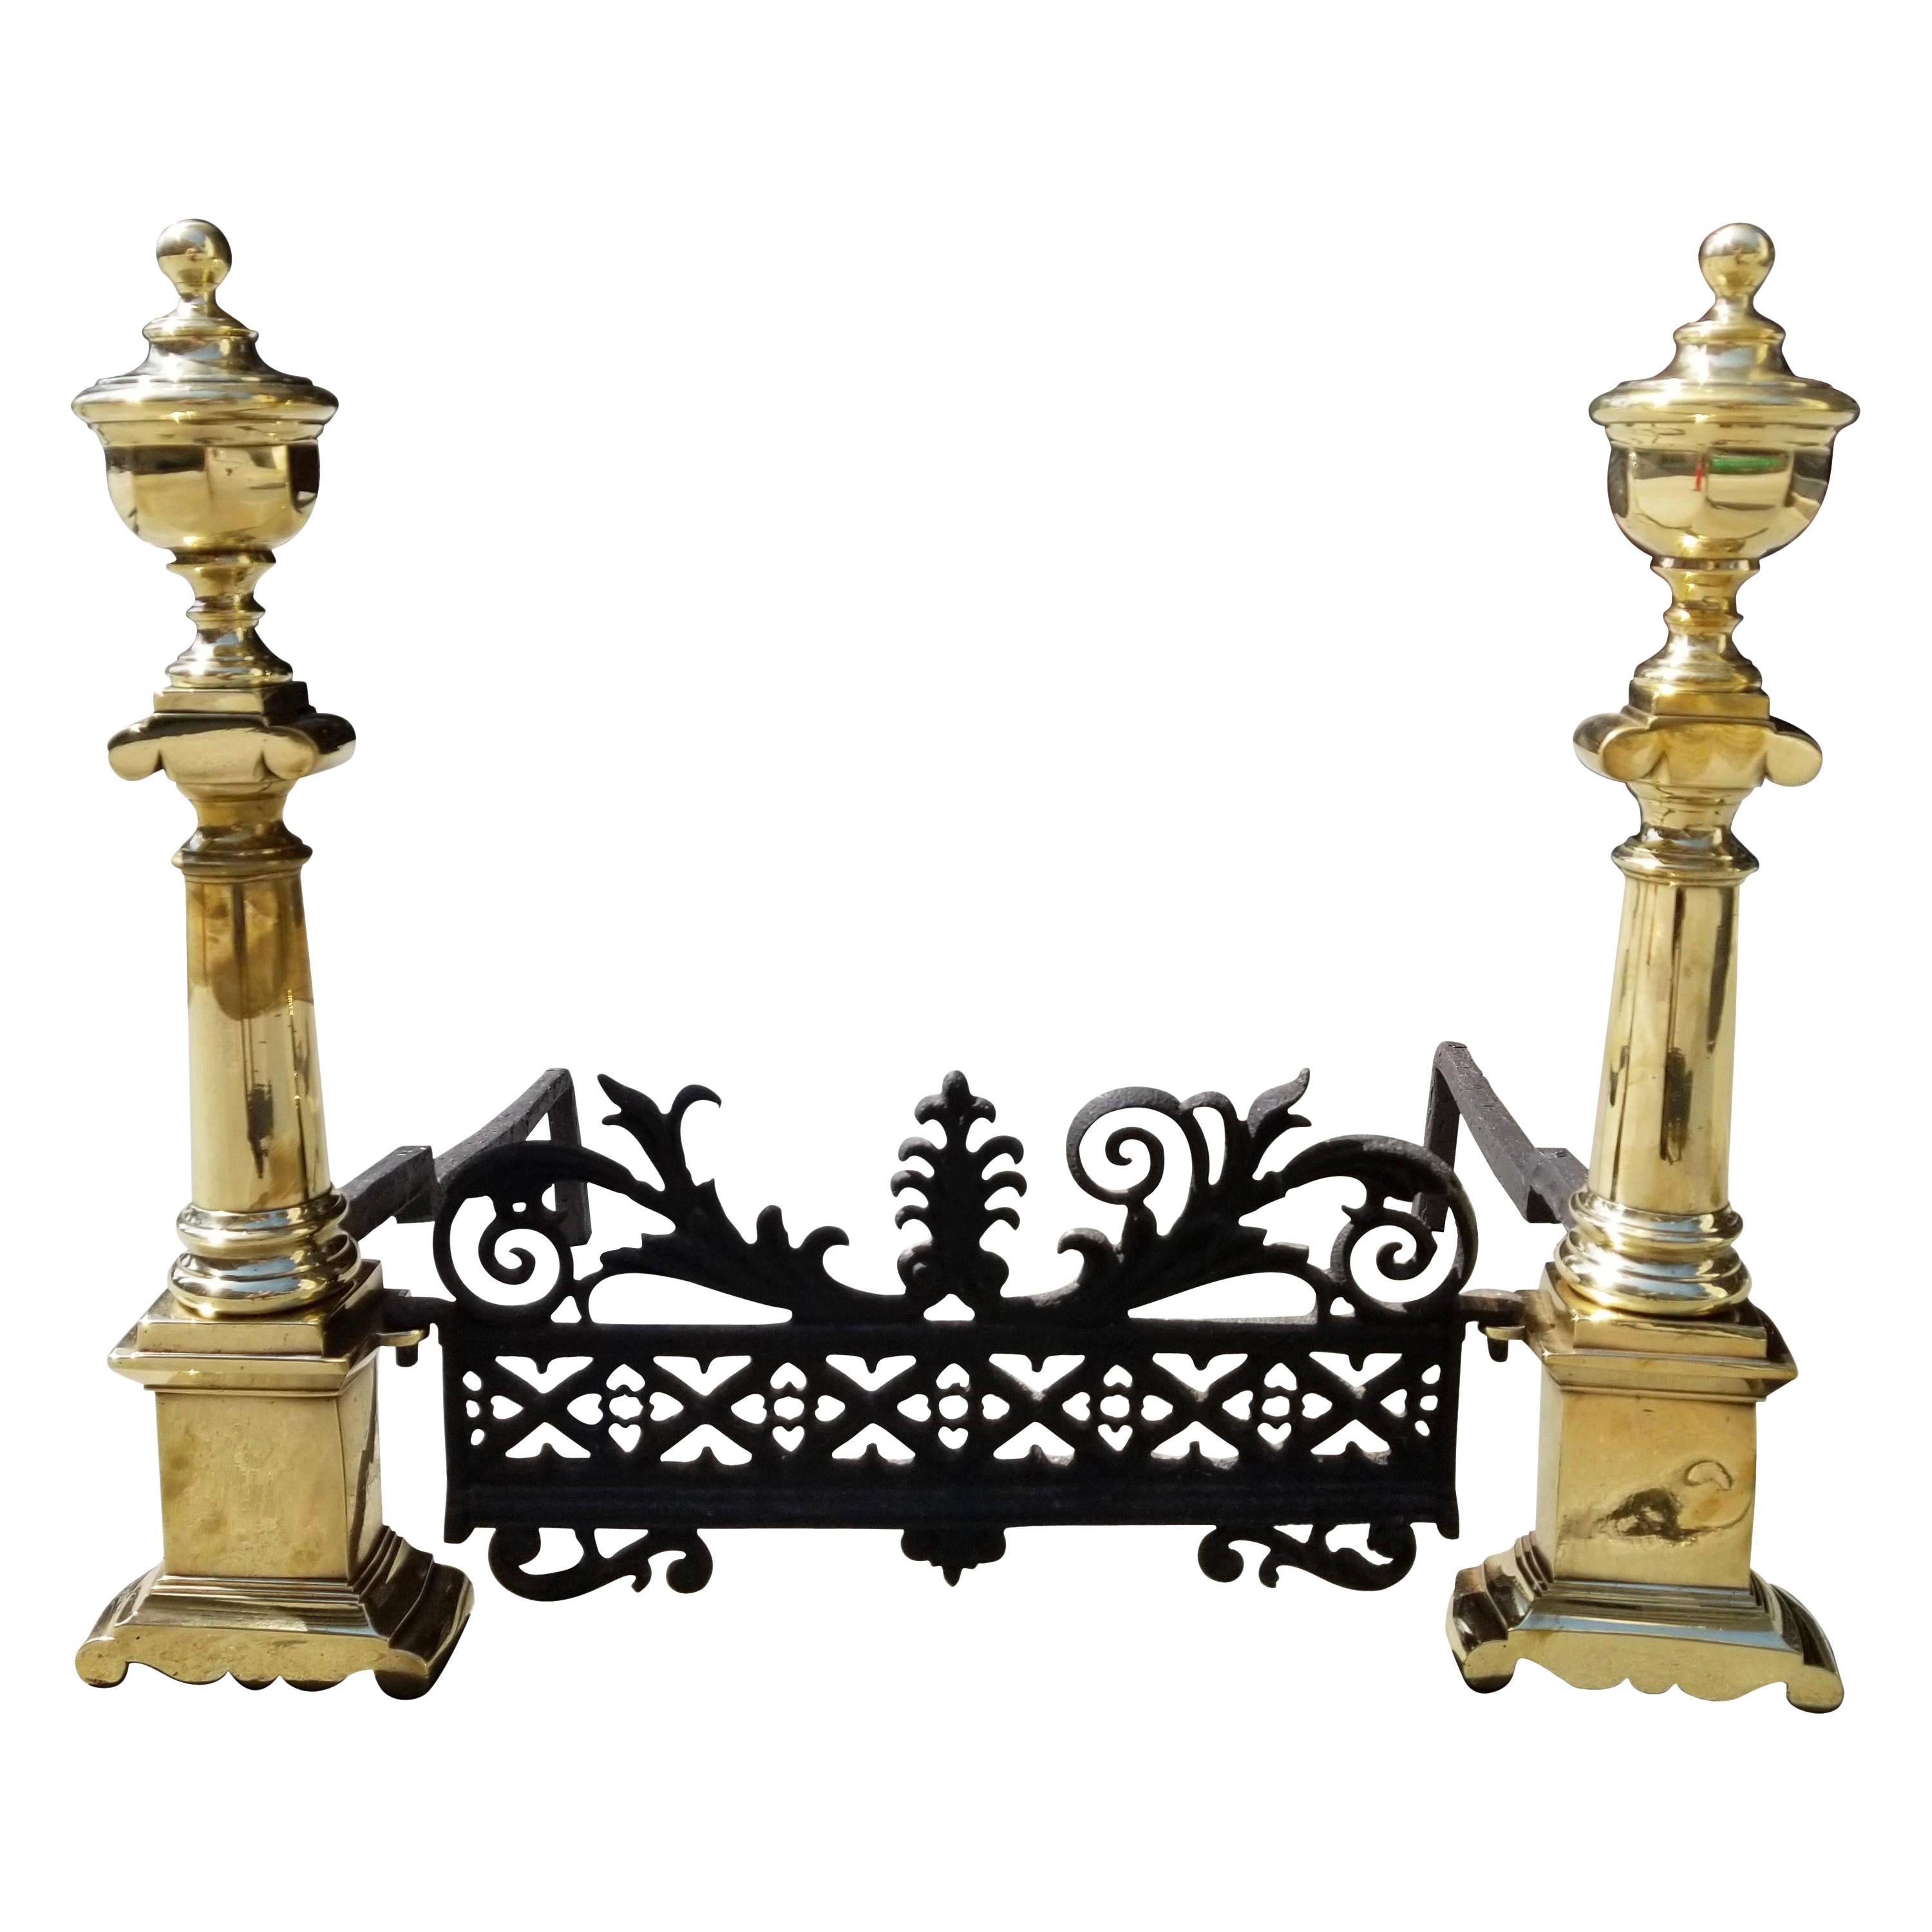 Pair of Early 19th Century Charleston Neoclassical Brass Andirons with Fender